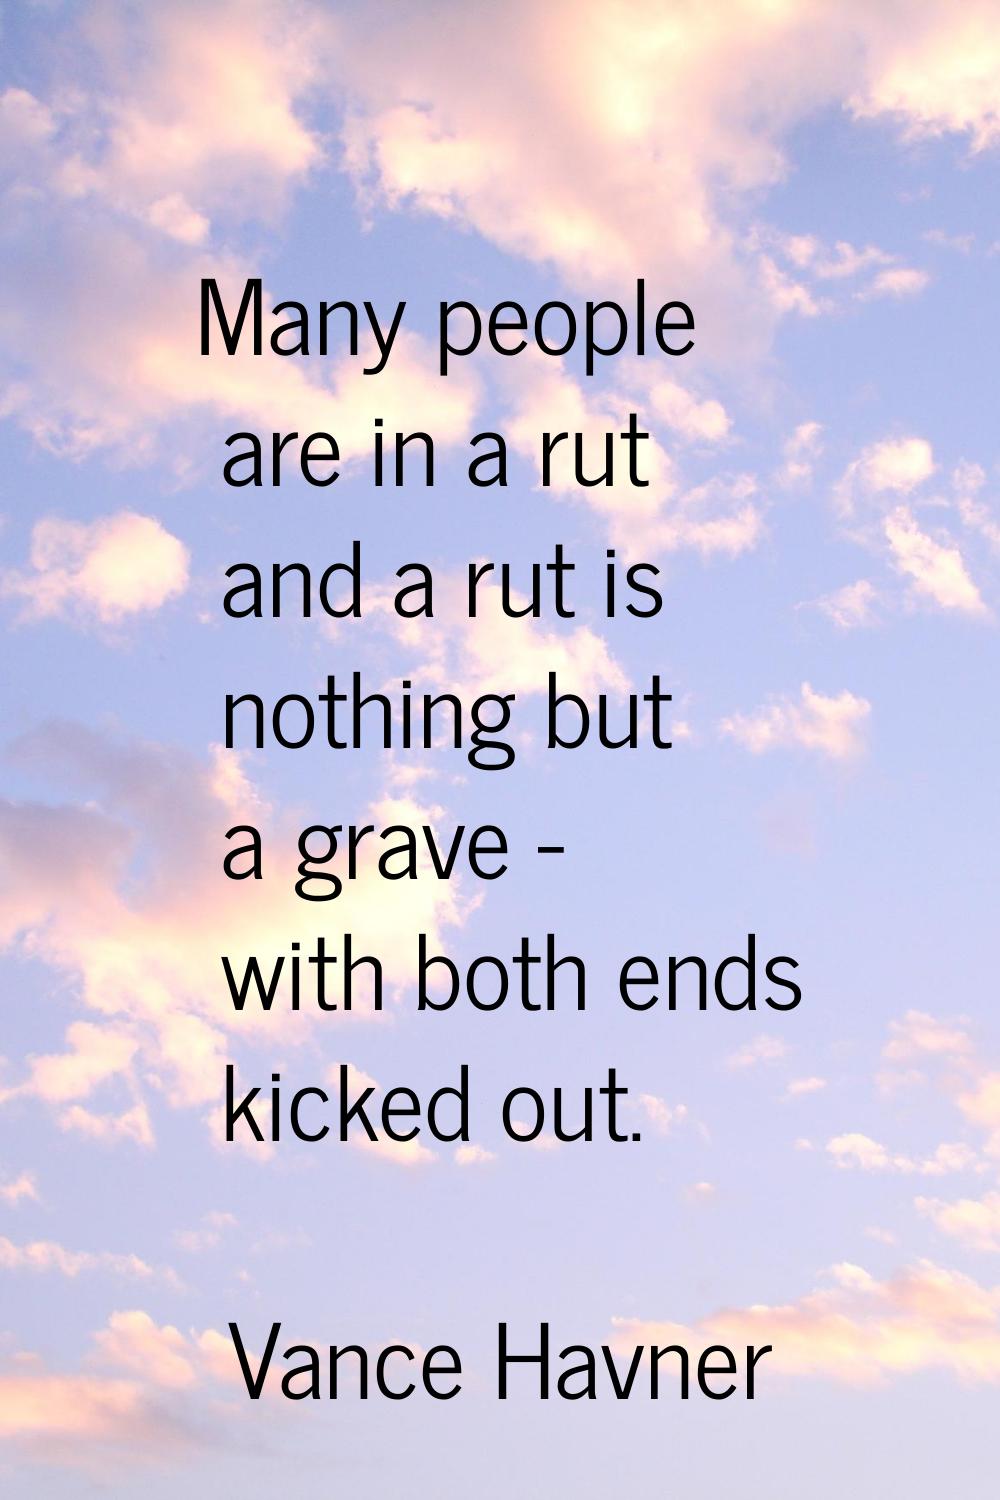 Many people are in a rut and a rut is nothing but a grave - with both ends kicked out.